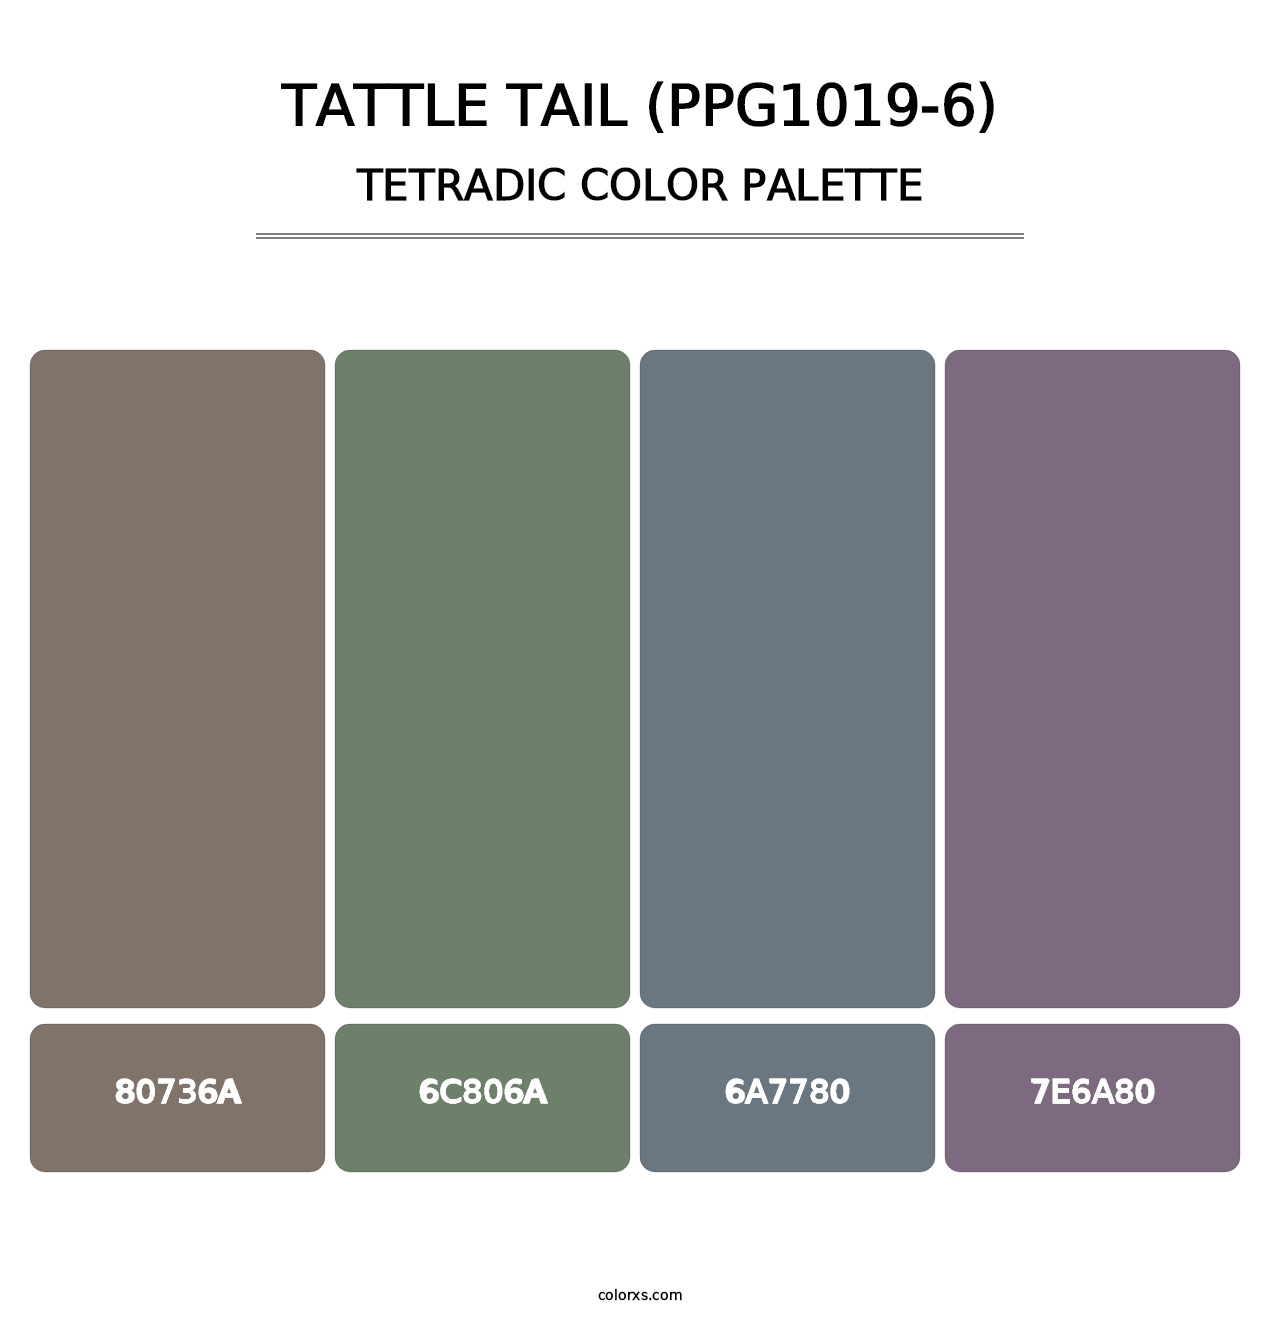 Tattle Tail (PPG1019-6) - Tetradic Color Palette